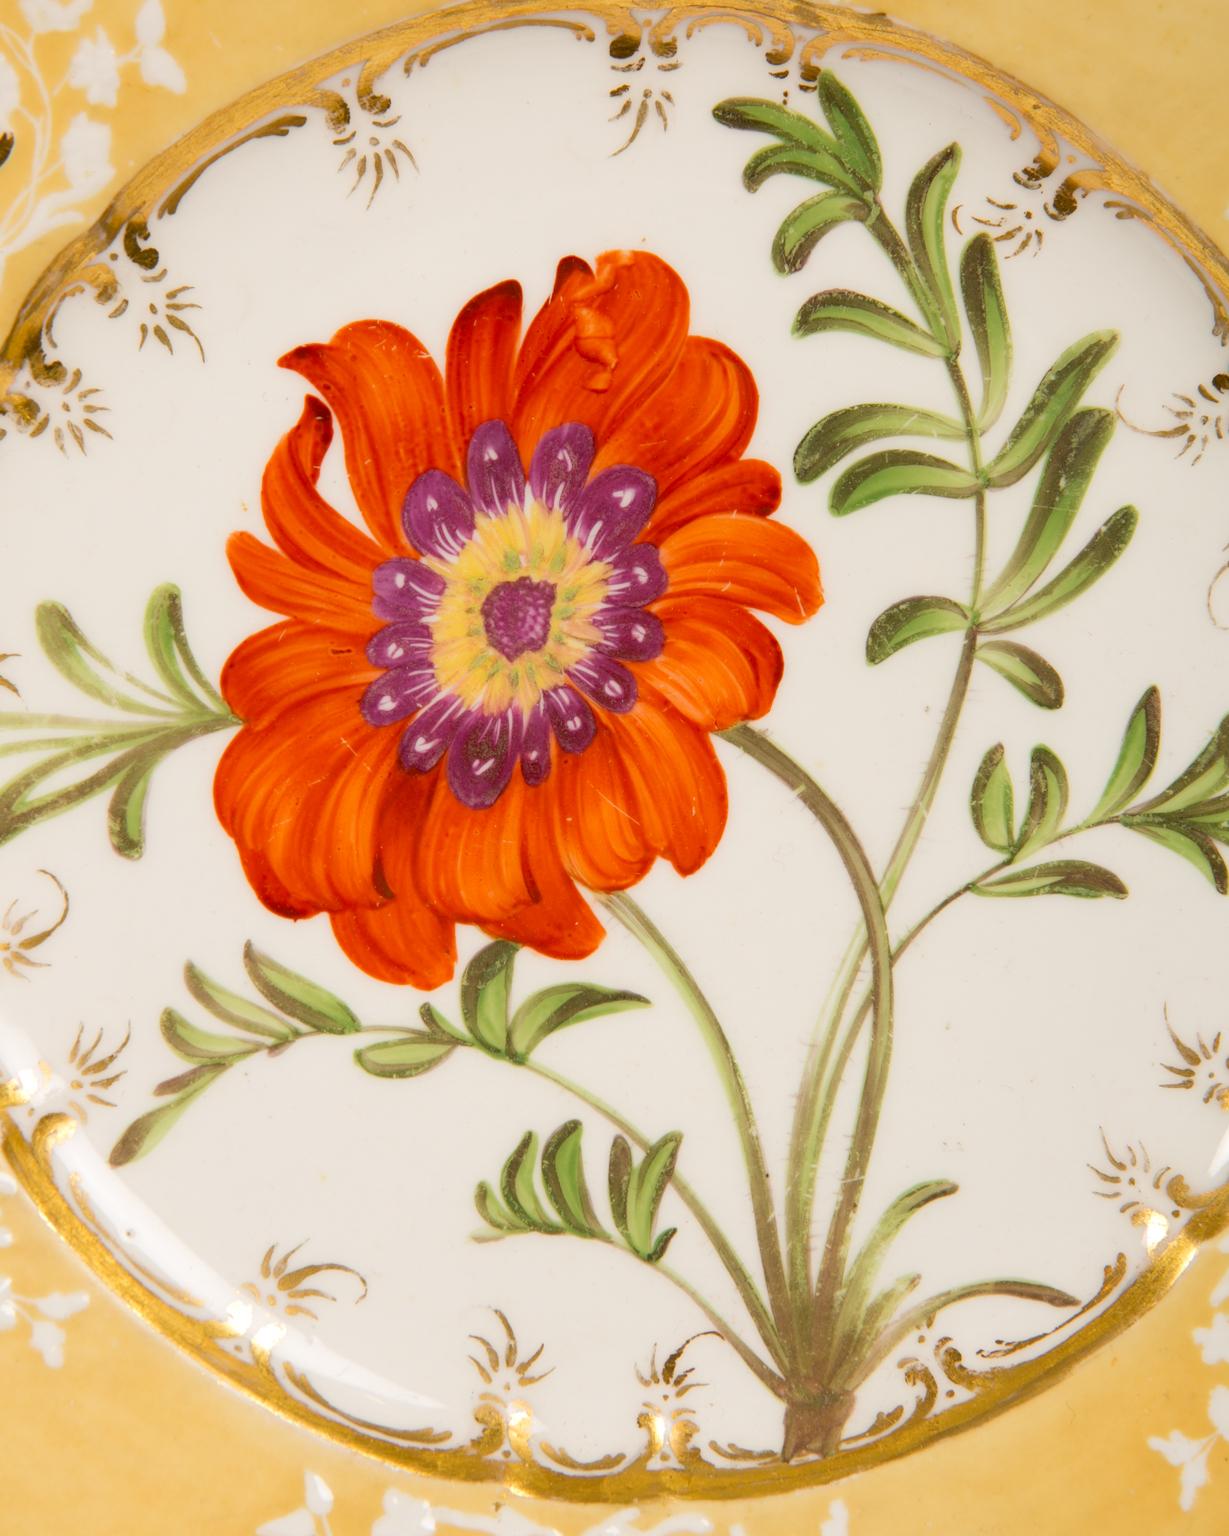 English Pair of Antique Dishes with Single Hand-Painted Flower circa 1825